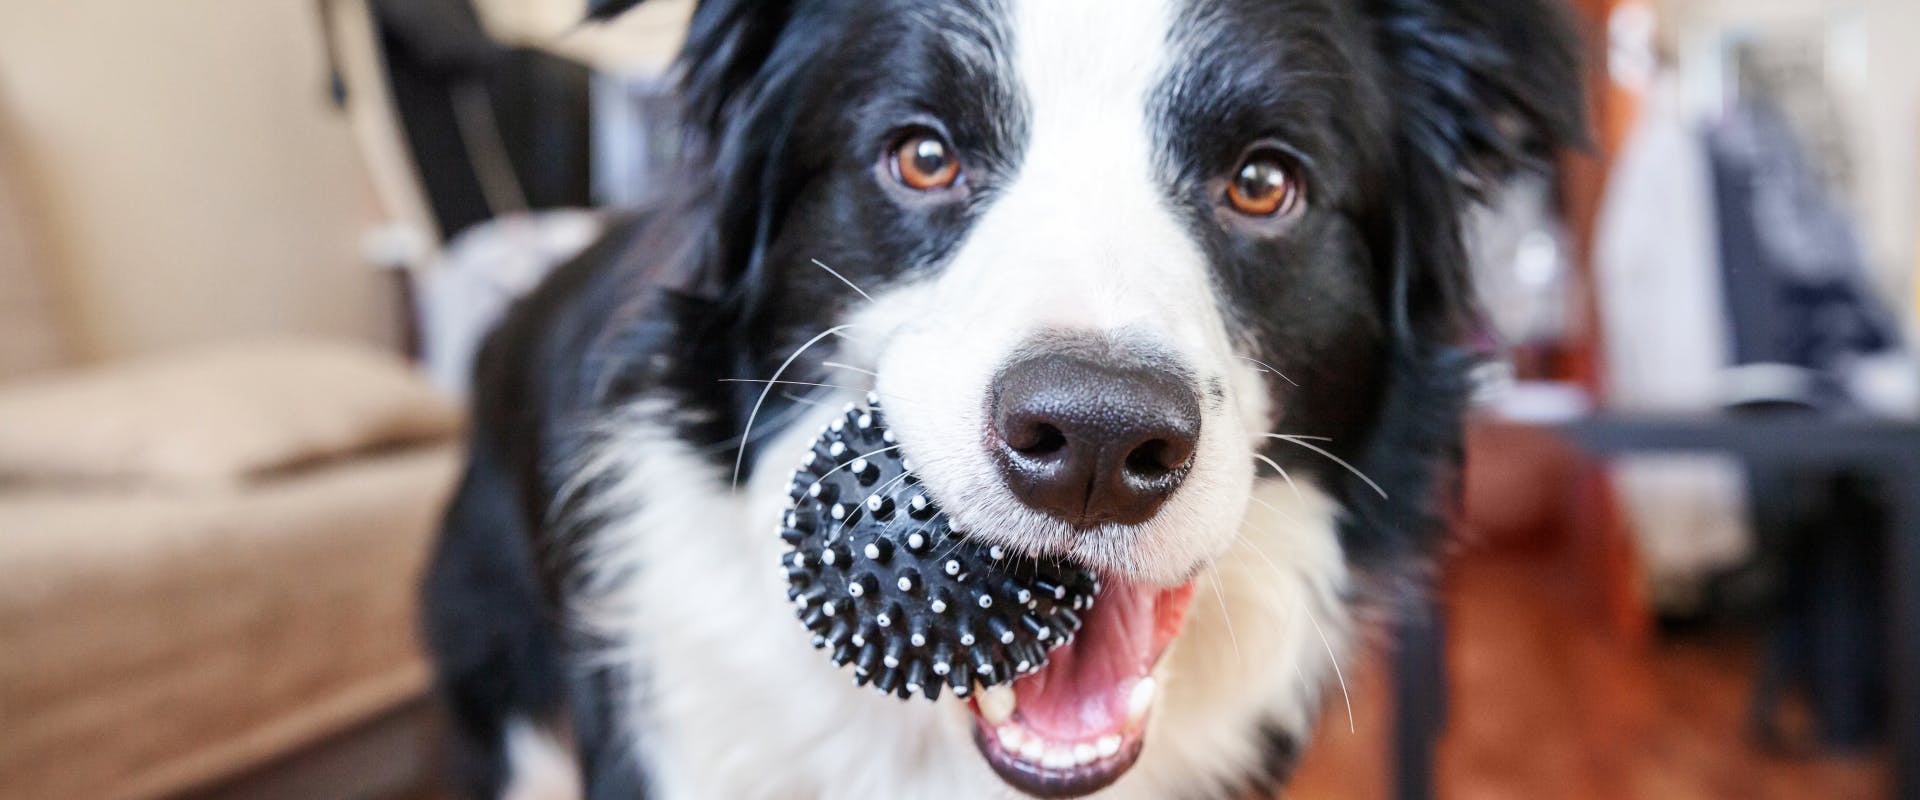 A dog with a ball in its mouth.